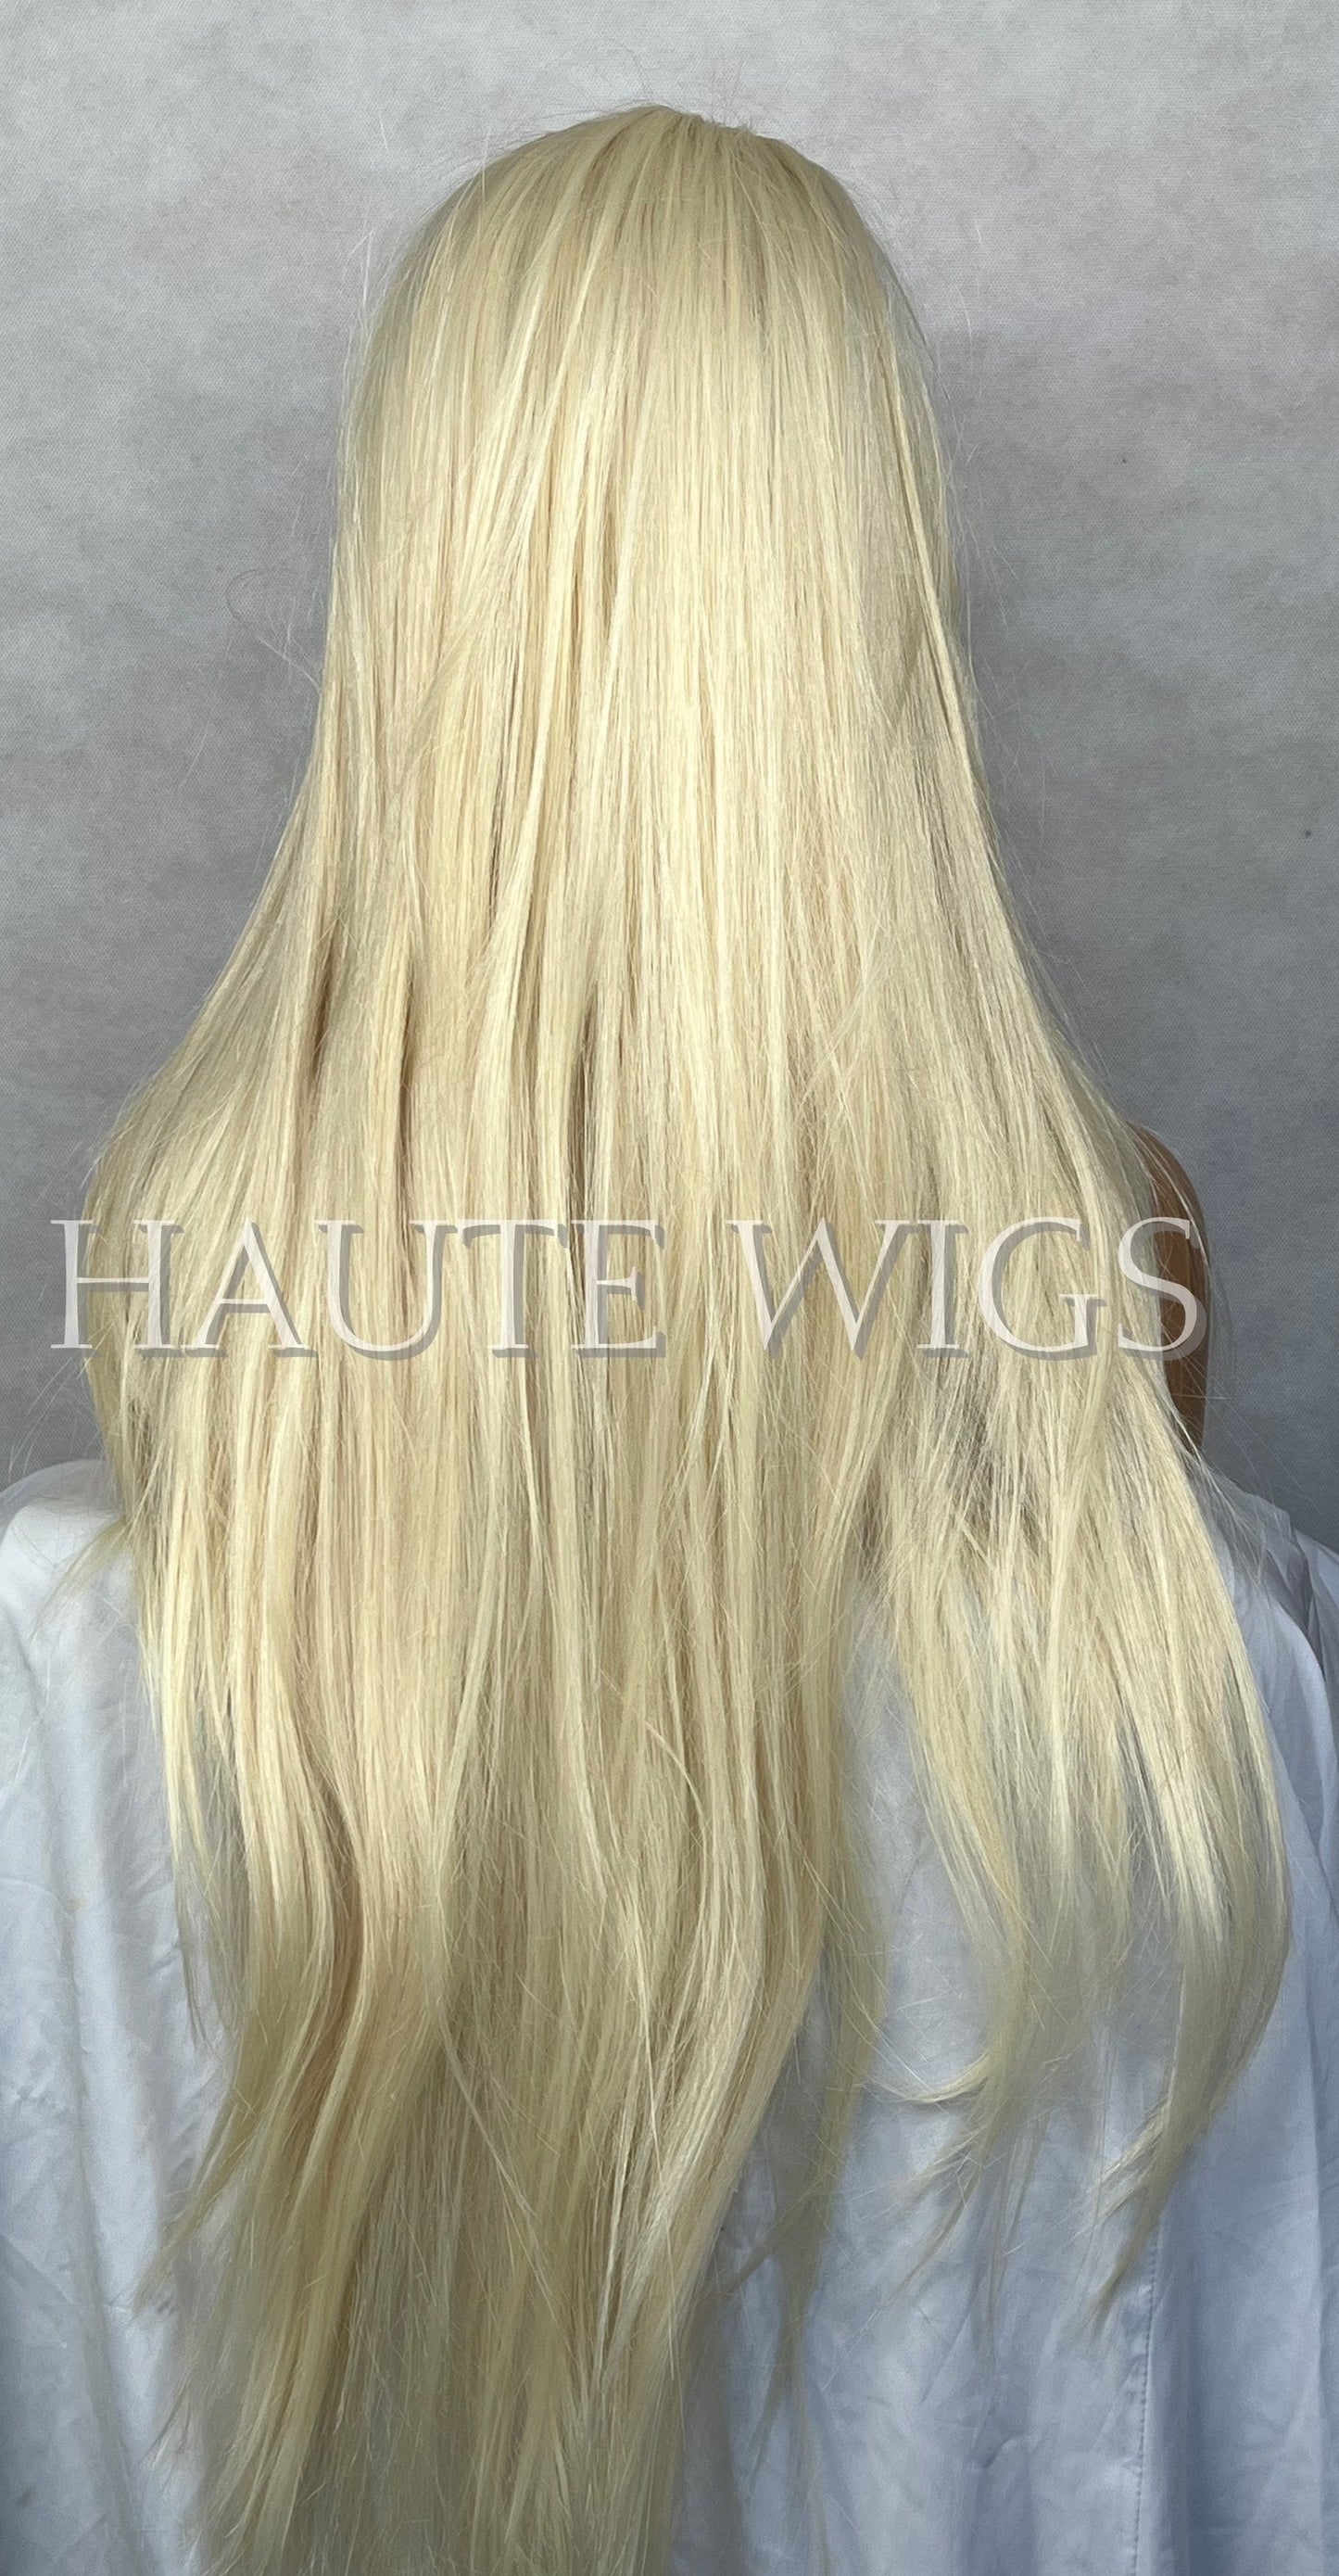 Sex Siren Blonde Wig Sexy Role Play Womens Long Layered Hair 613 Fringe Bangs Realistic Human Hair Blends Straight Ladies Wigs Gift